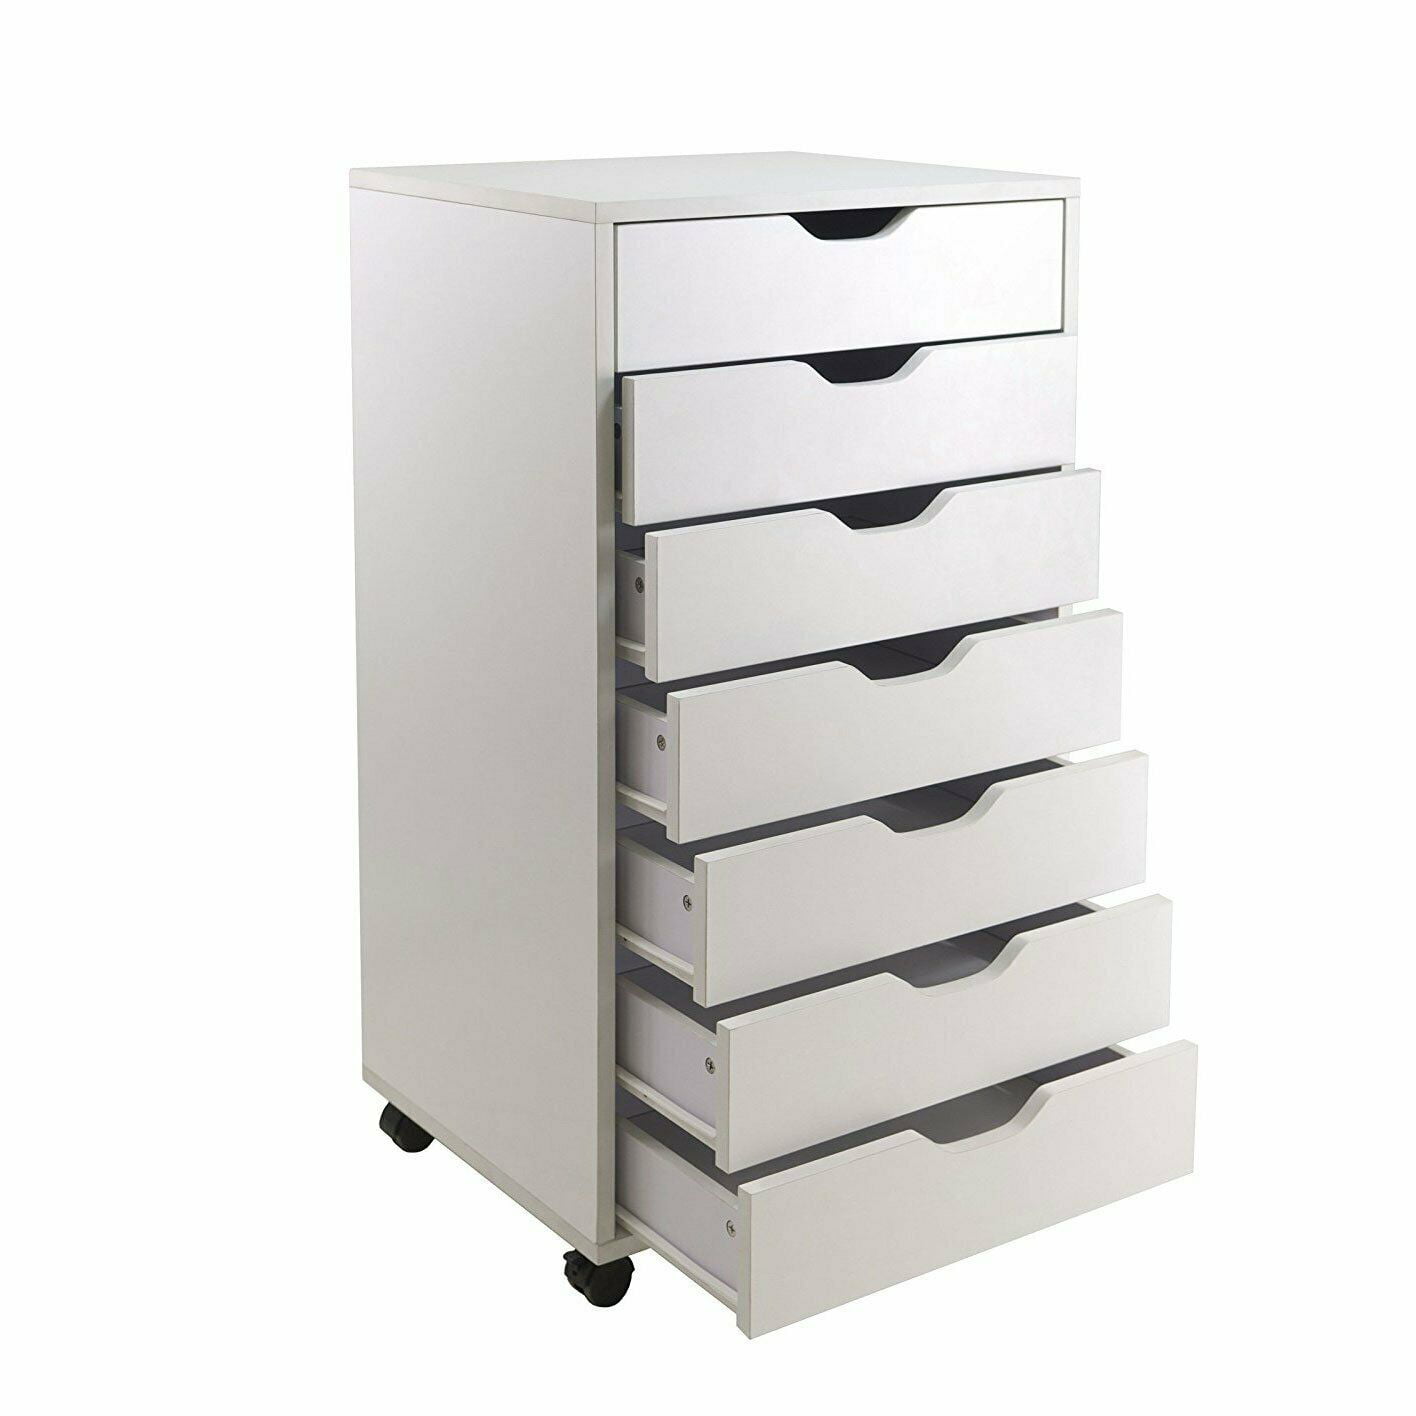 Details about   Home Office 7 Drawer Mobile Storage Cabinet Filing Cabinet with Locking Casters 